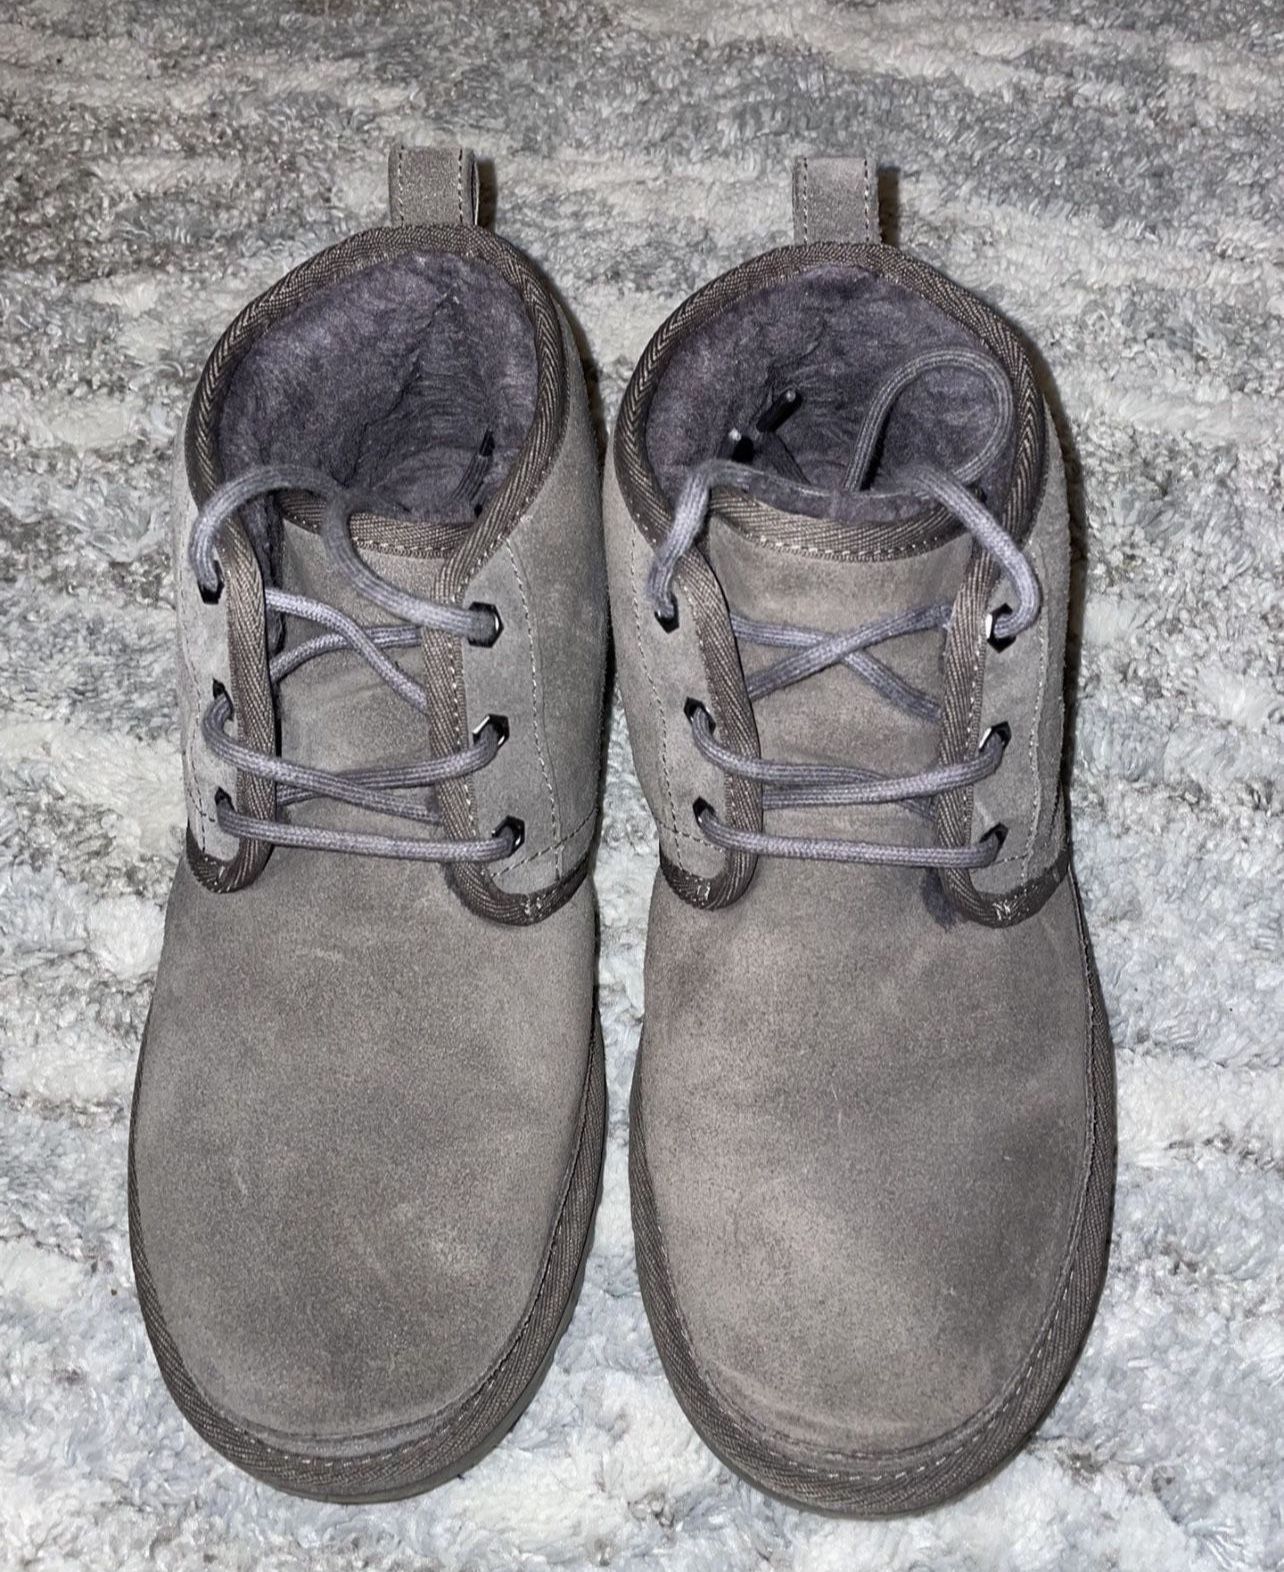 Ugg Boots $25 Size 6 Mens